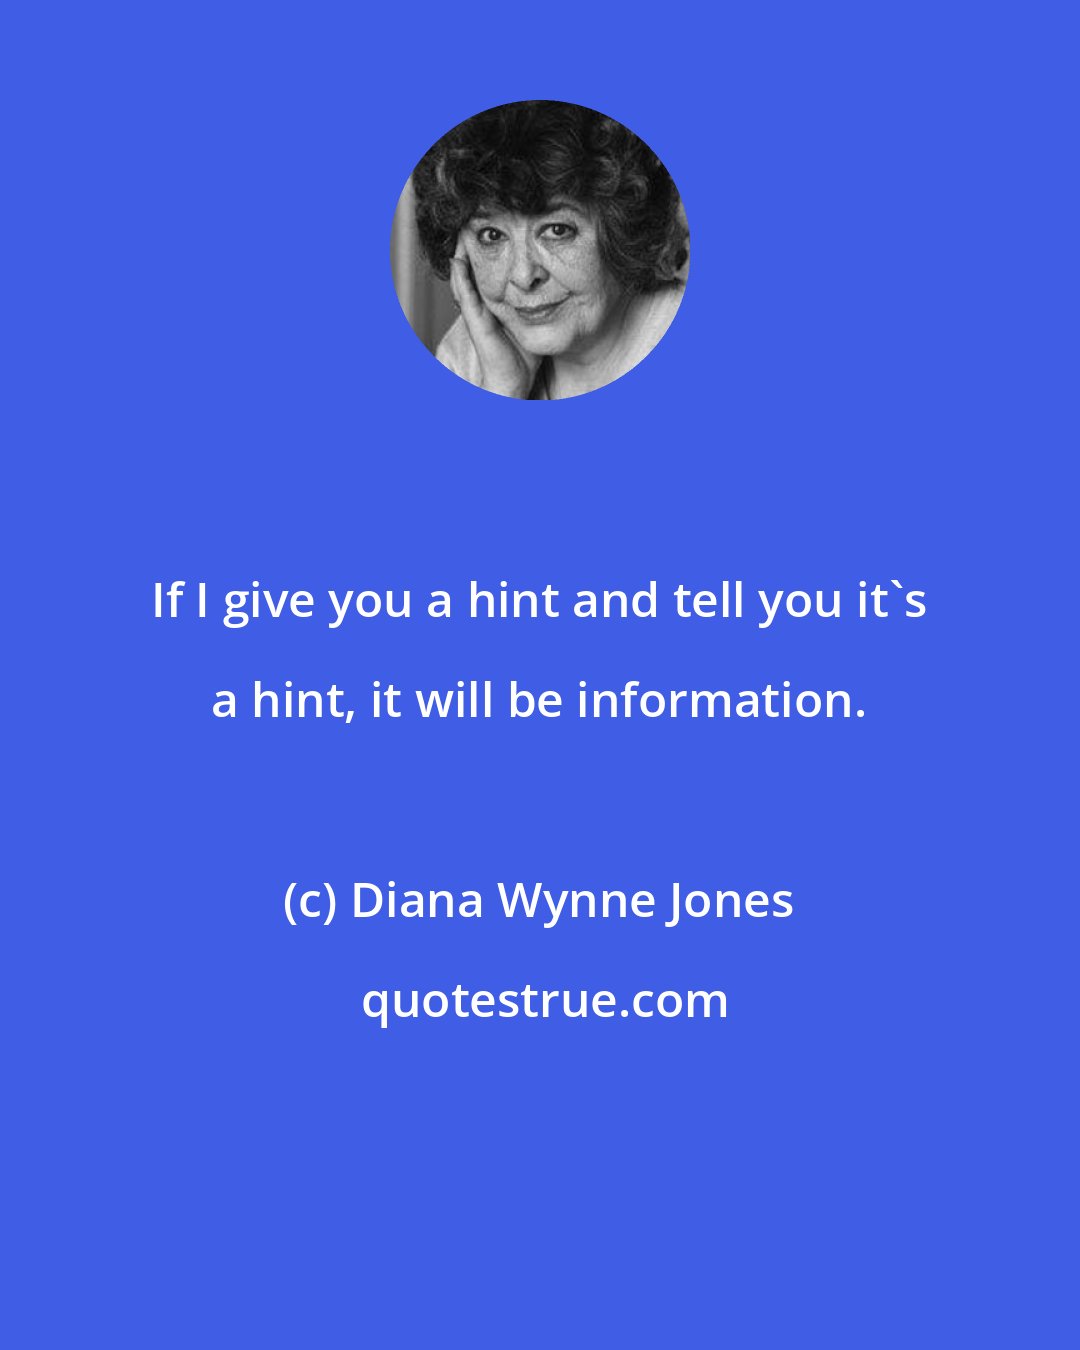 Diana Wynne Jones: If I give you a hint and tell you it's a hint, it will be information.